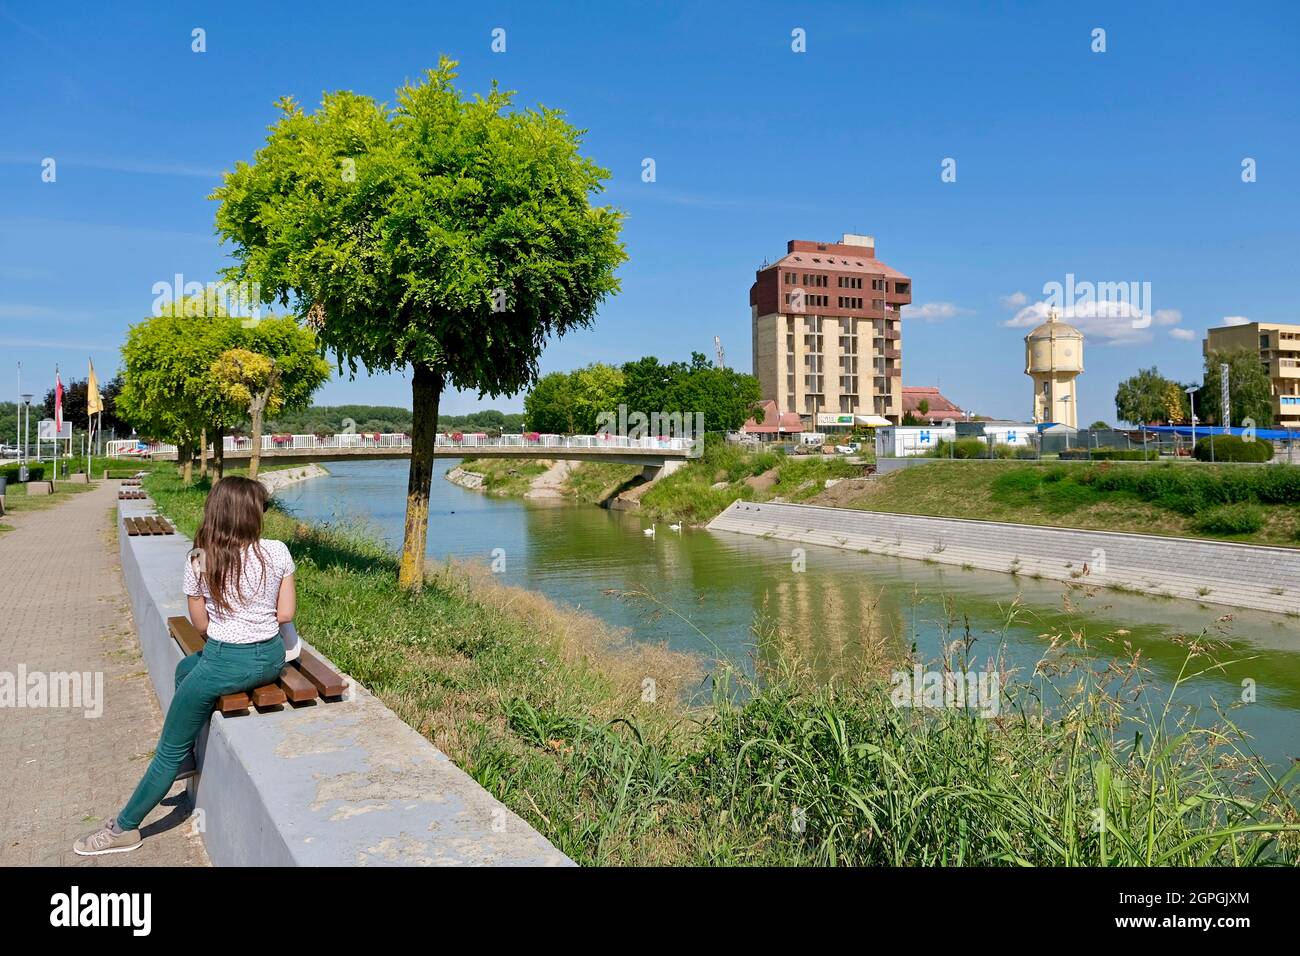 Croatia, Slavonia, Vukovar, the Vuka river which flows into the Danube with the old water tower and the Dunav hotel in the background Stock Photo